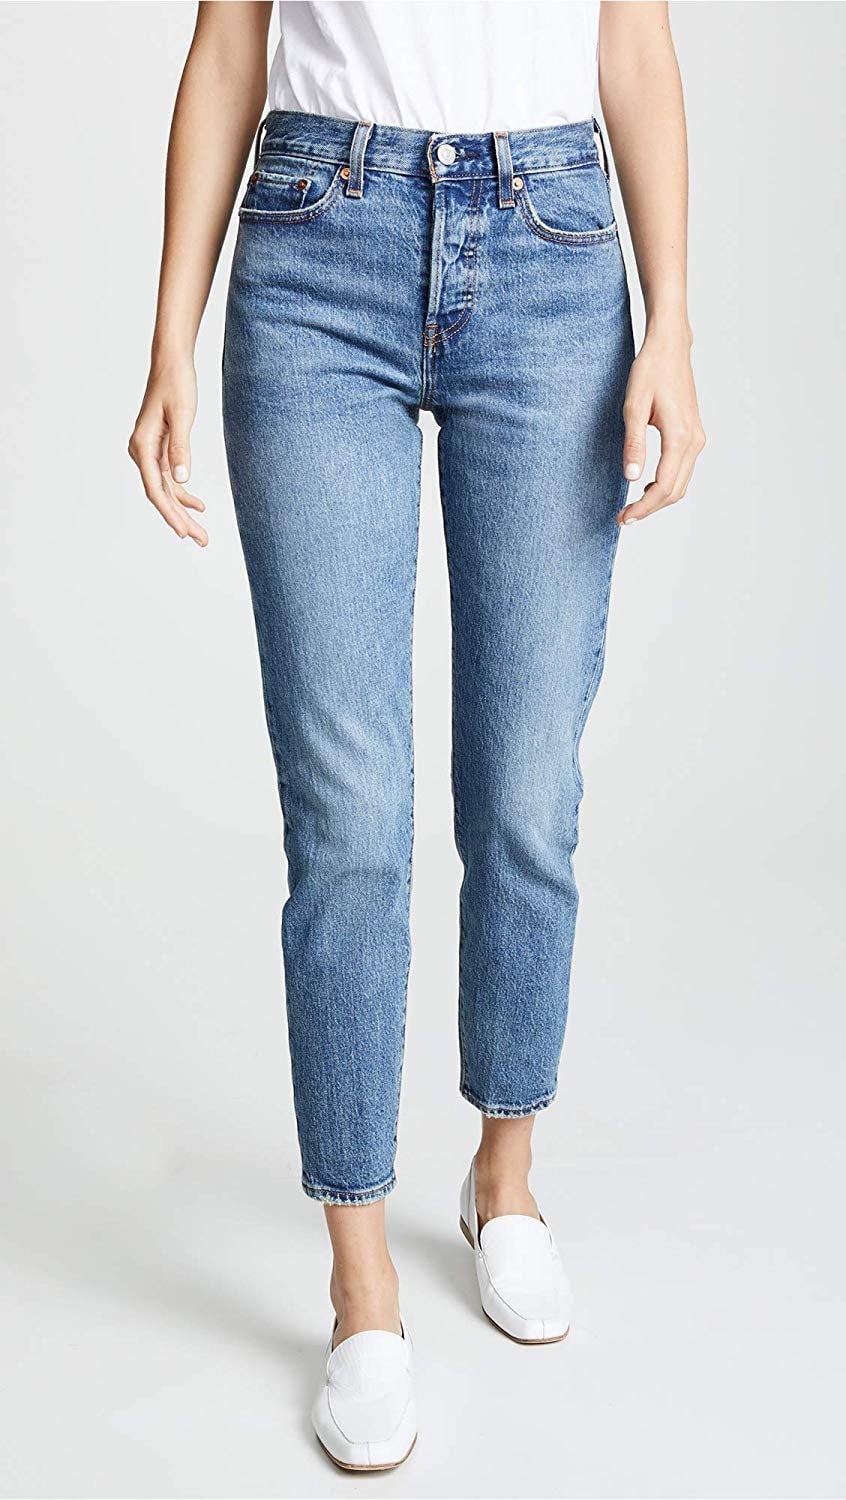 Levi's Women's Wedgie Icon Jeans | From Boots to Dresses, These Are the 31  Hottest Pieces You Can Buy on Amazon | POPSUGAR Fashion Photo 30